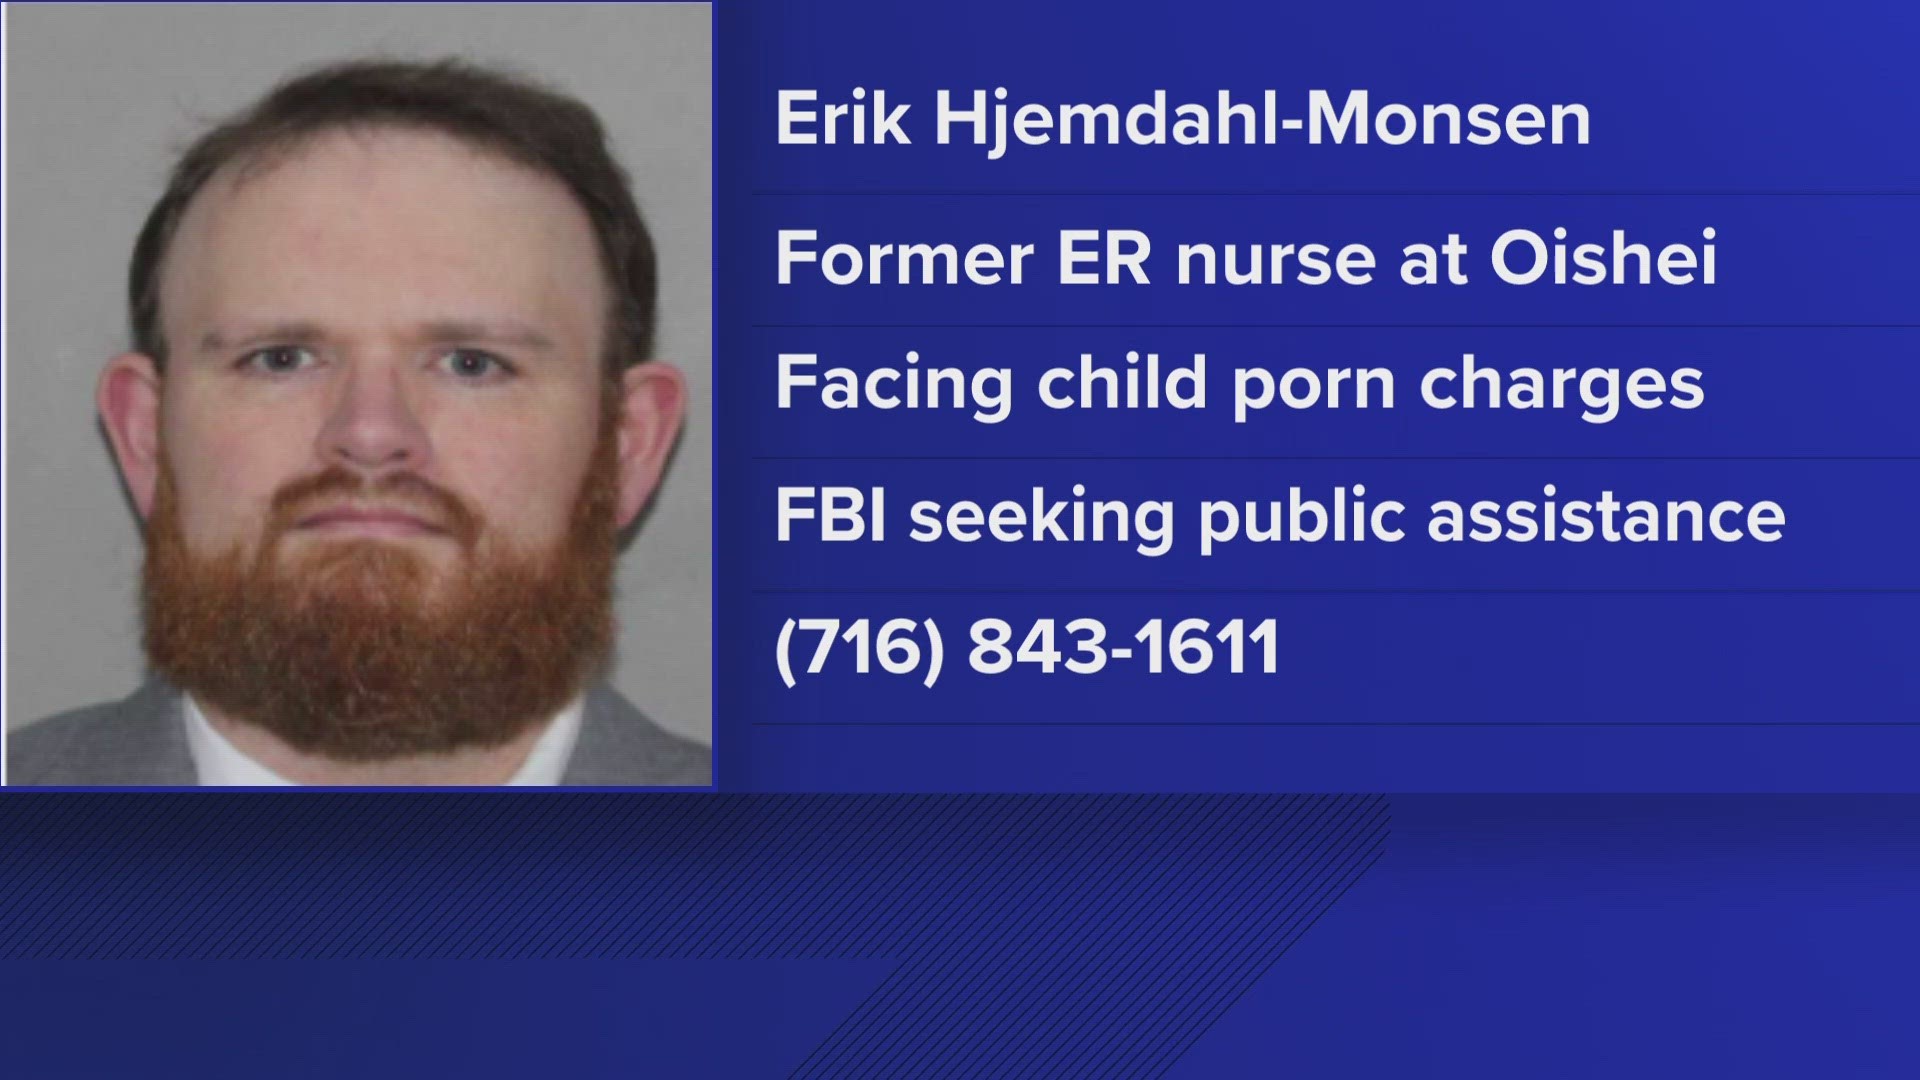 The FBI is asking for the public's help on a case involving child sex assault material